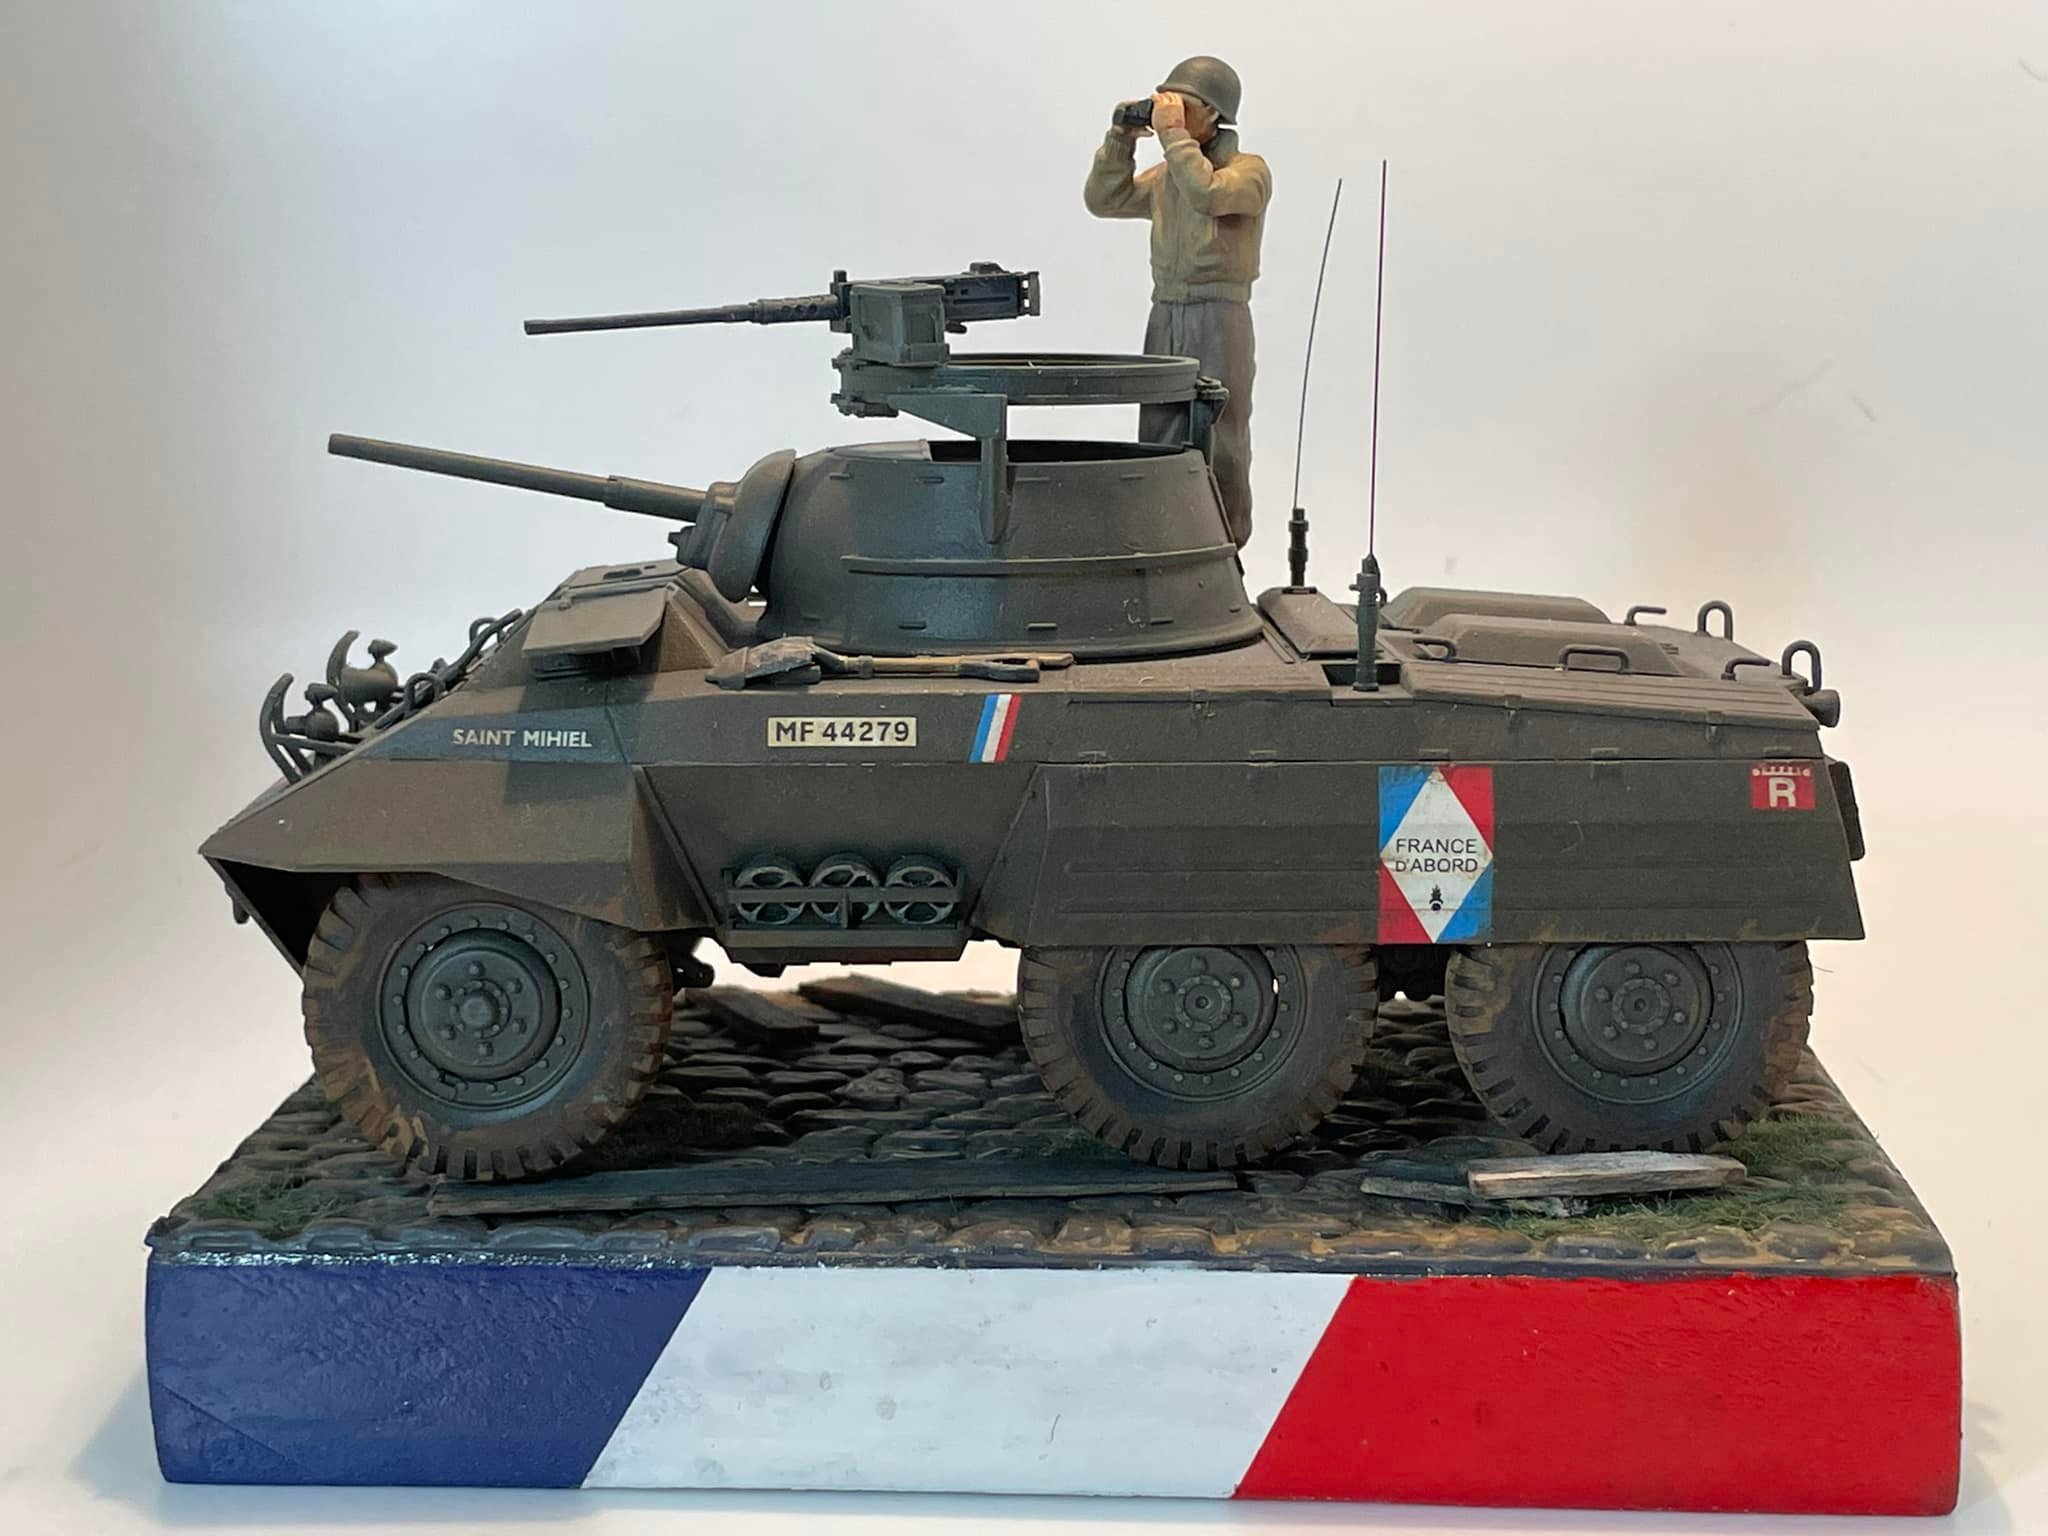 M8 Greyhound in Free French Service, 5th Armored Division, France 1944 (Tamiya 1/35)
